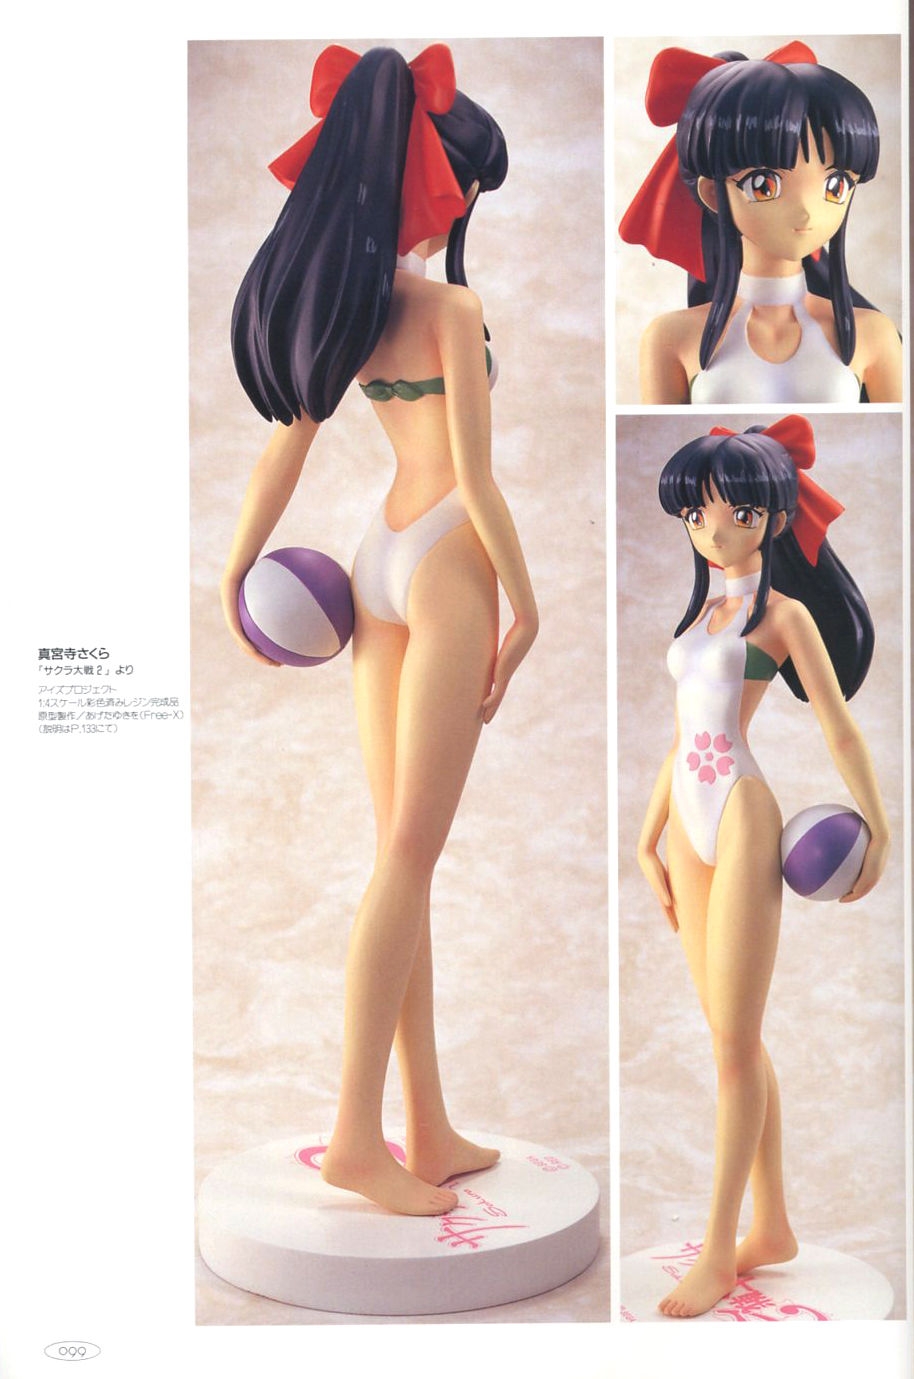 Hobby Japan Mook All That Figure 2001 87